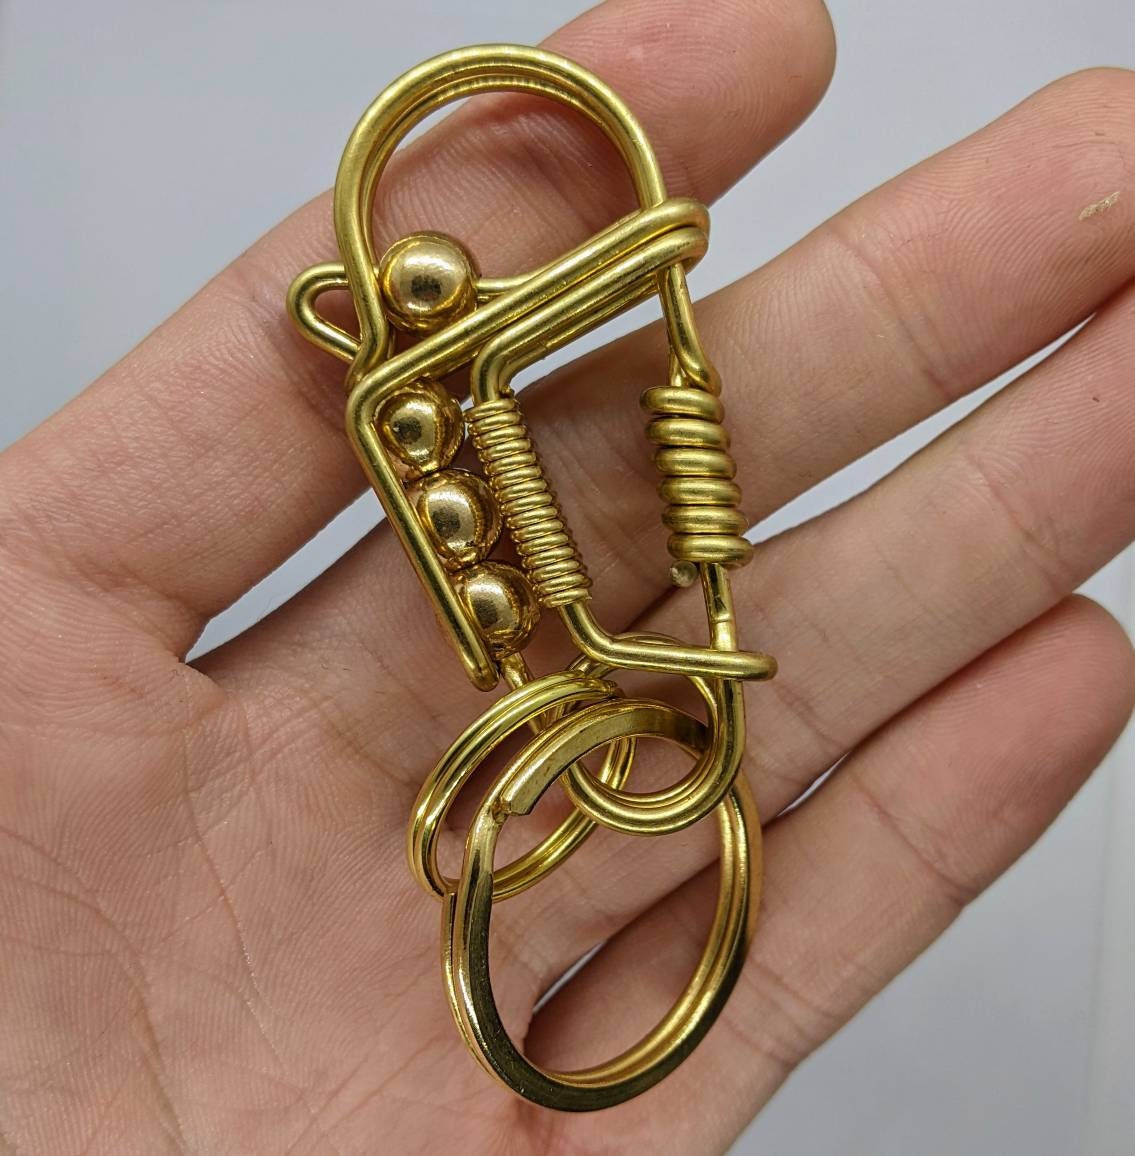 Leather wrap brass carabiner clip with whistle and key cover